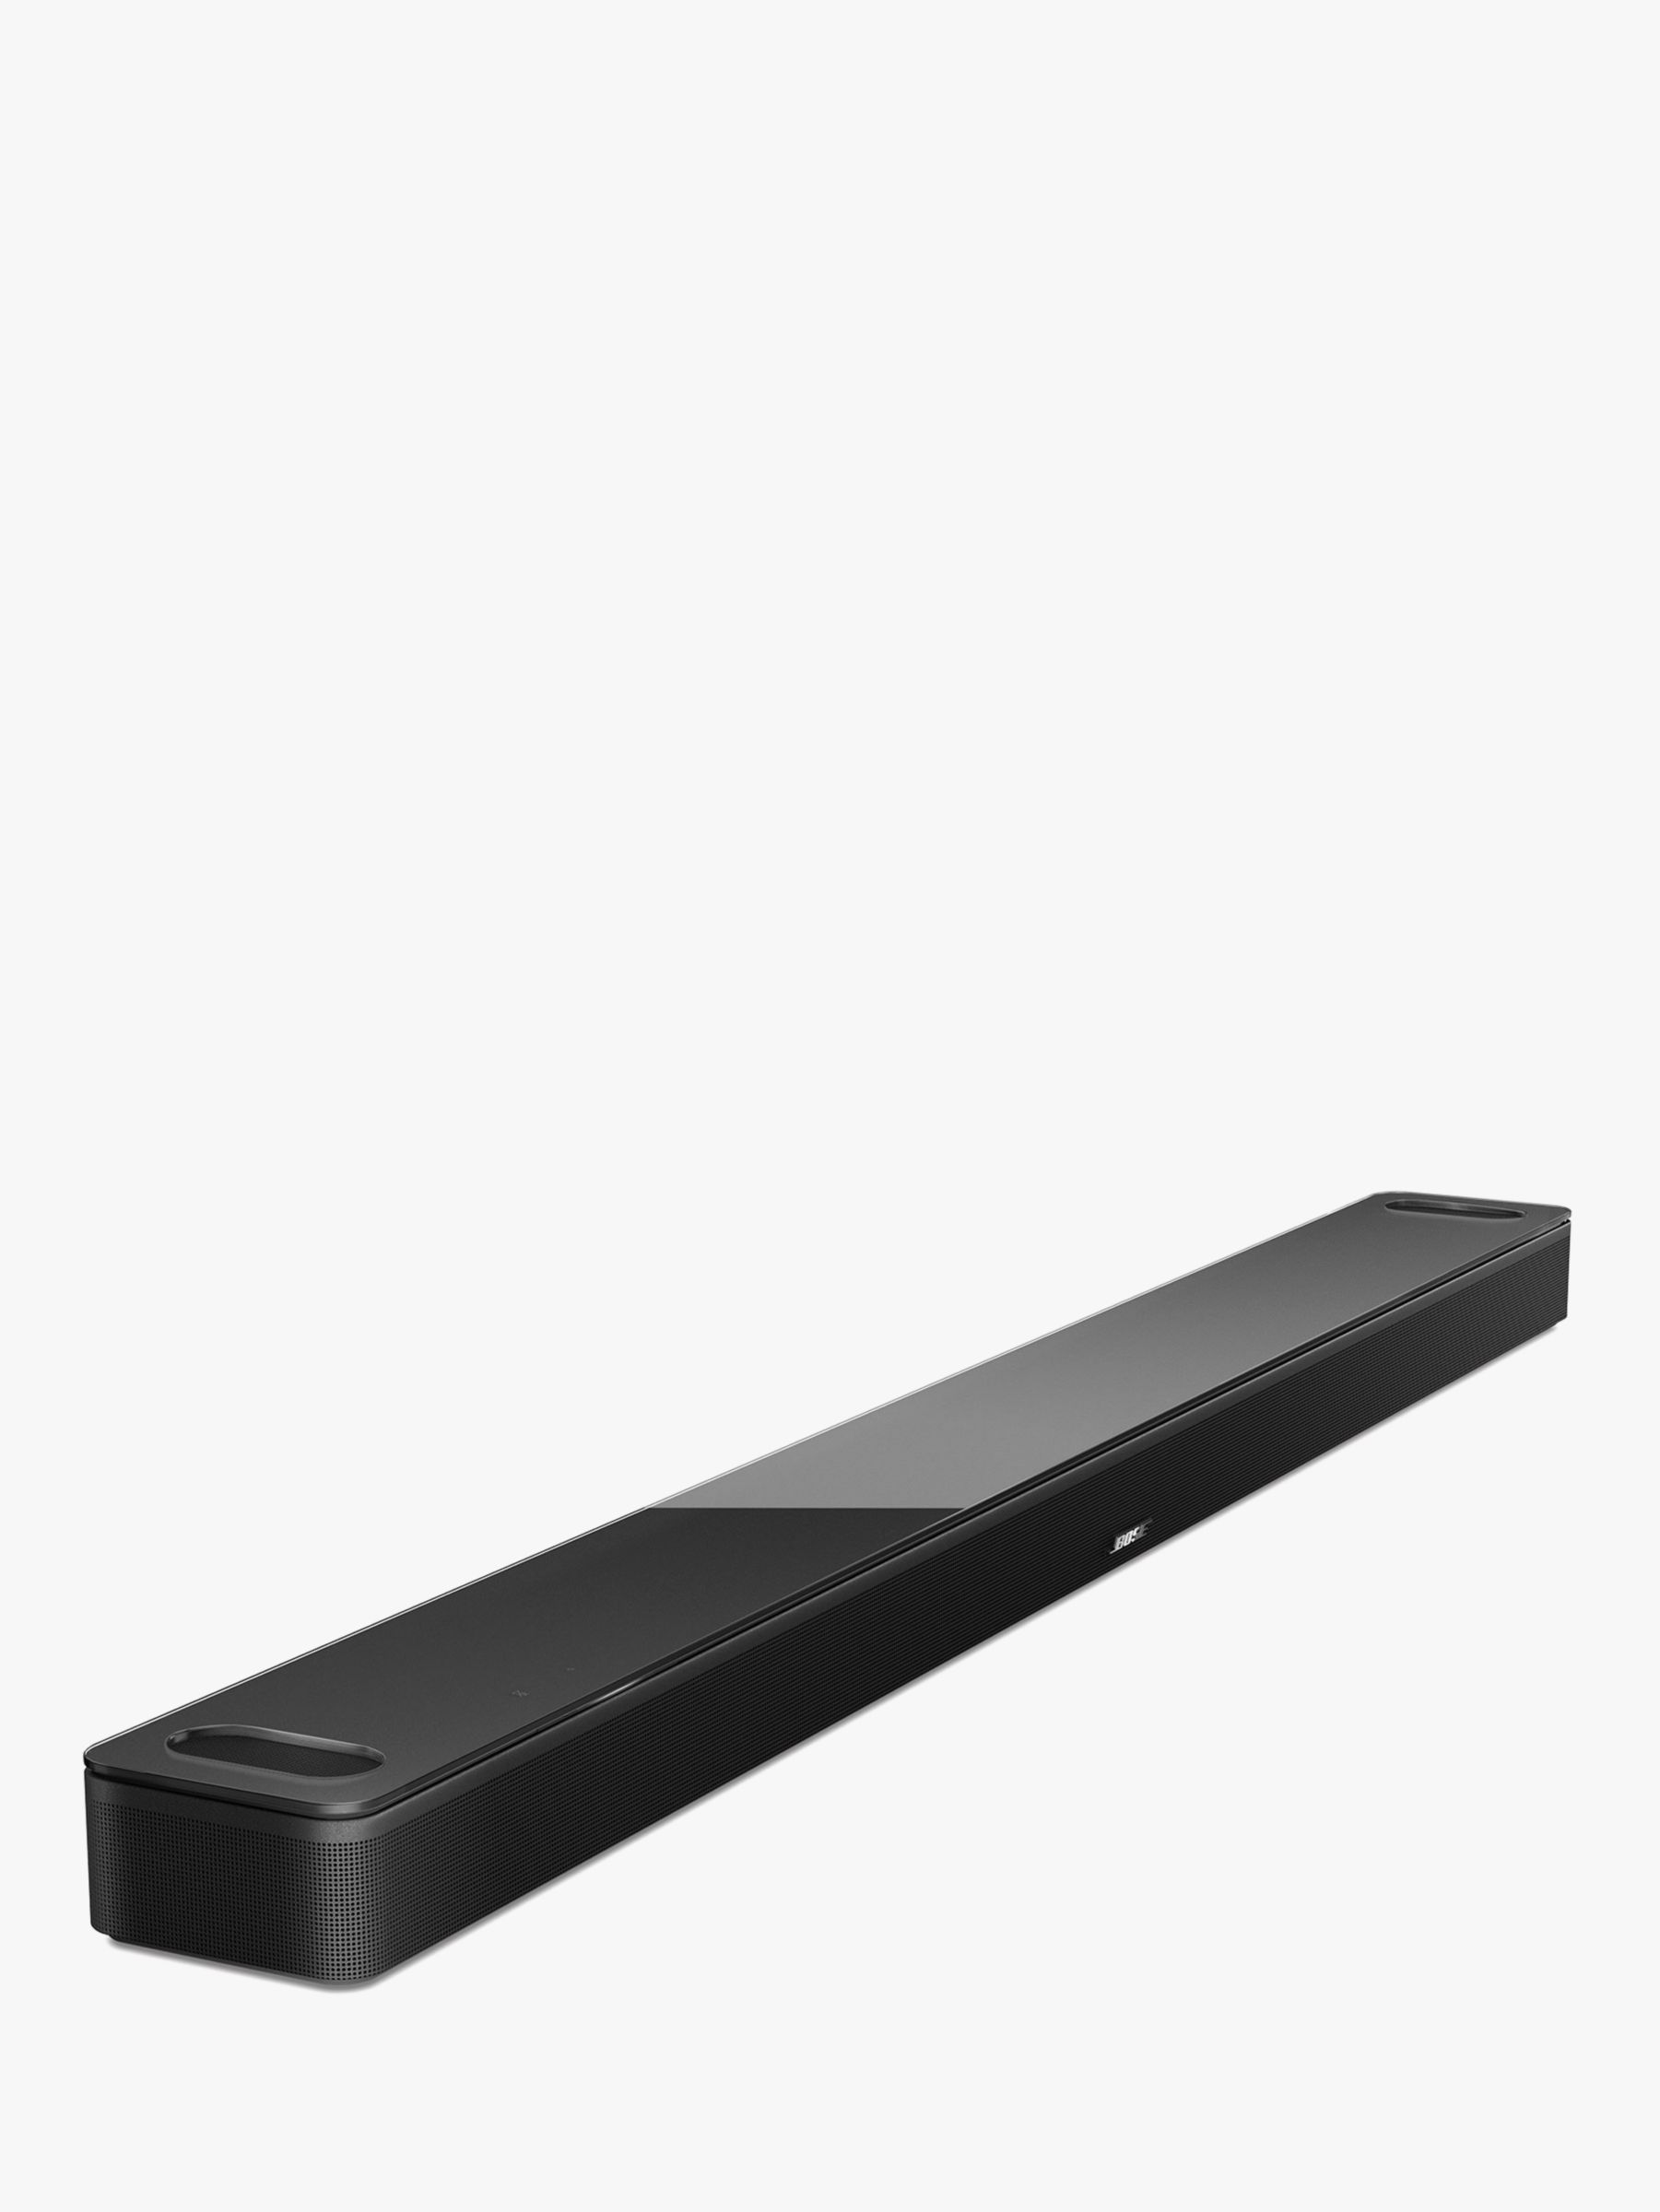 Bose Smart Soundbar 900 with Dolby Atmos, Wi-Fi, Bluetooth & Voice Recognition and Control, Black